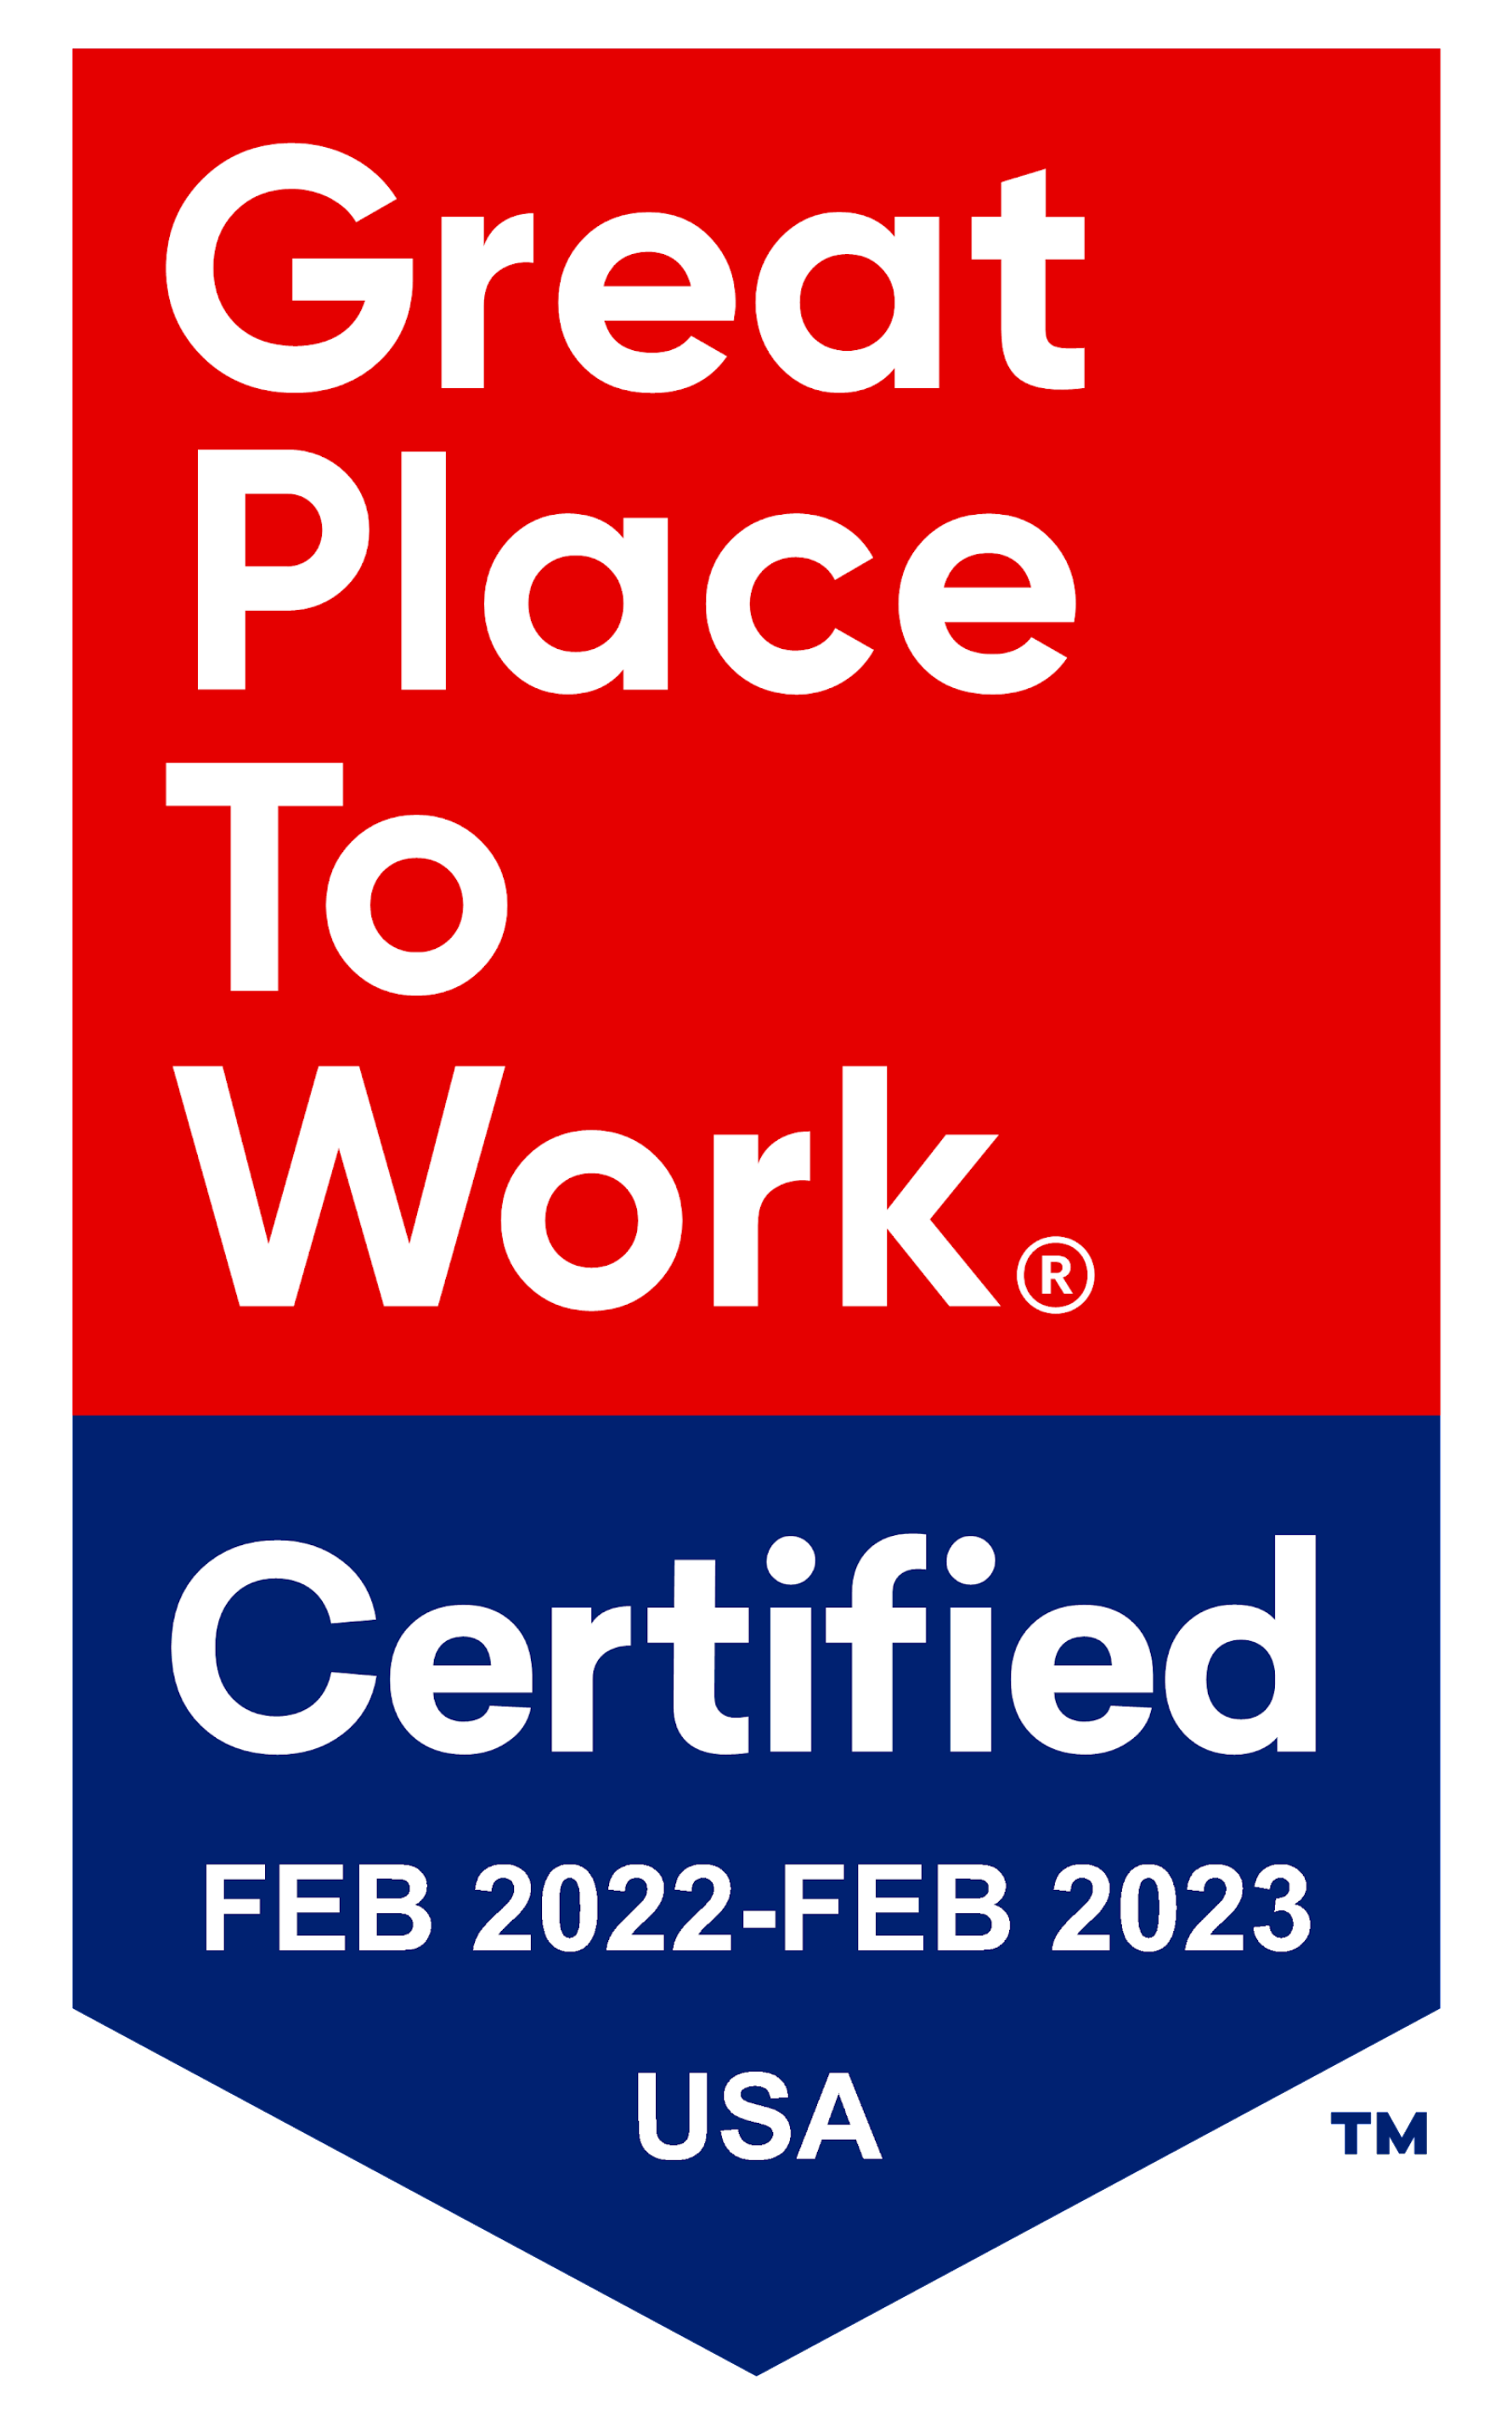 Great Place To Work Logo